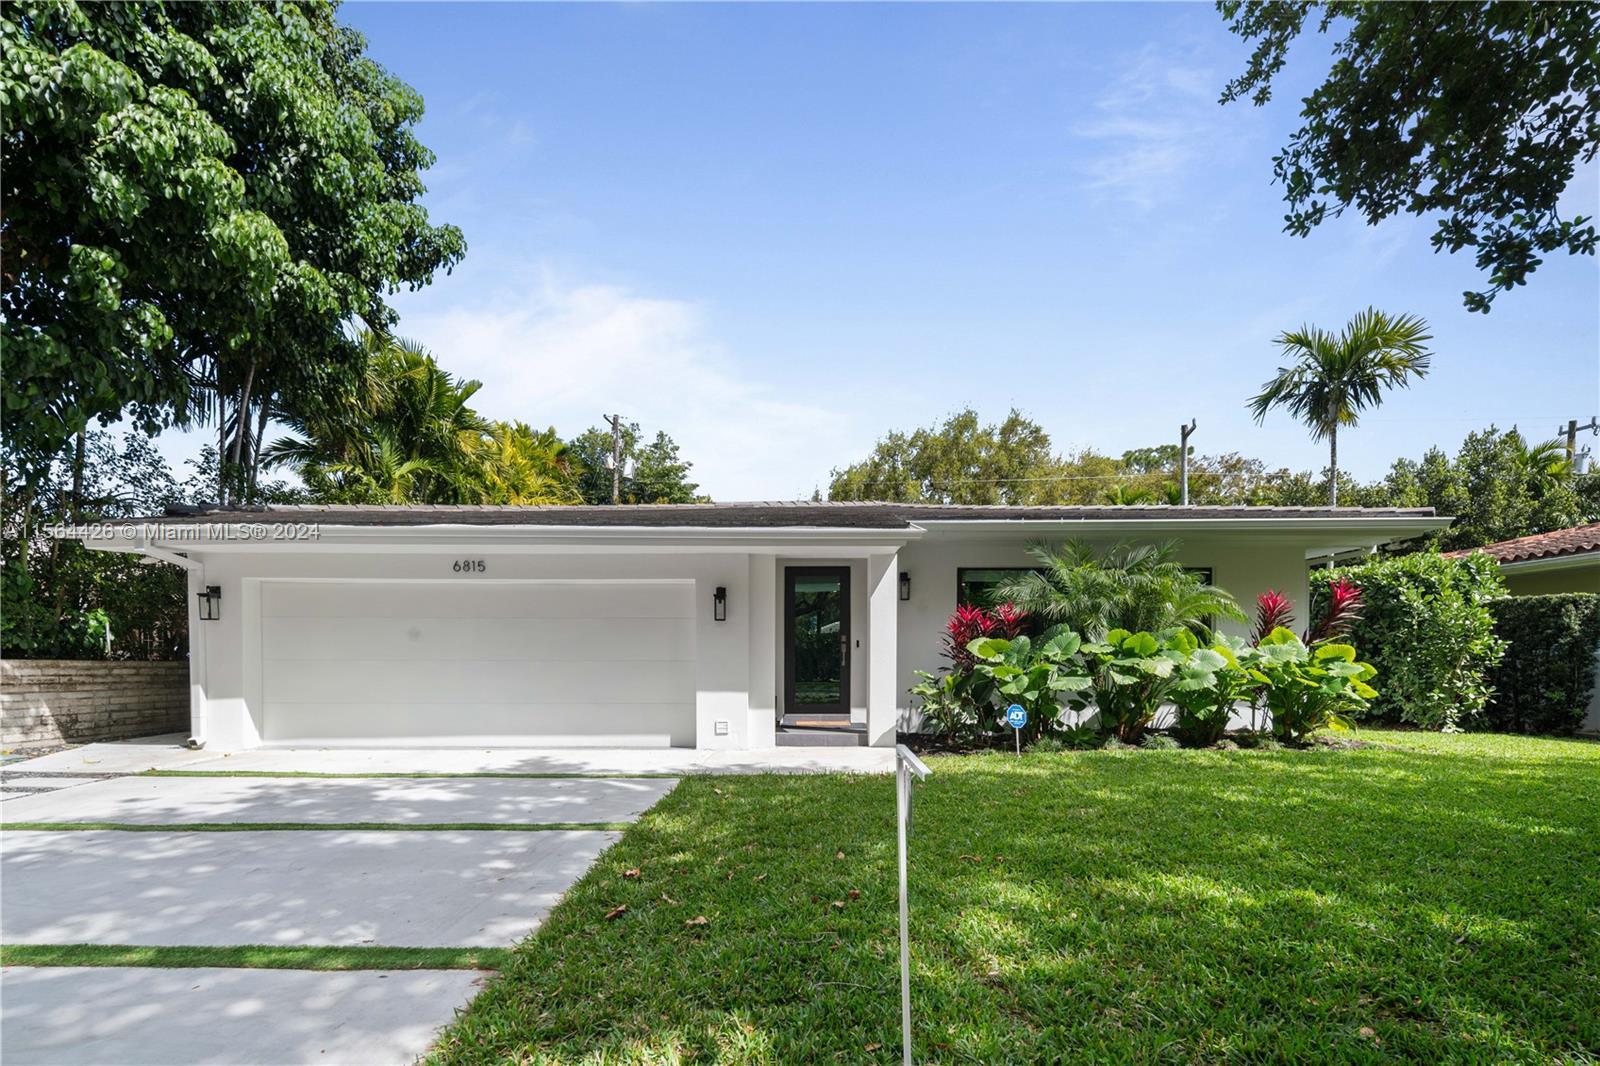 Photo of 6815 Trionfo St in Coral Gables, FL